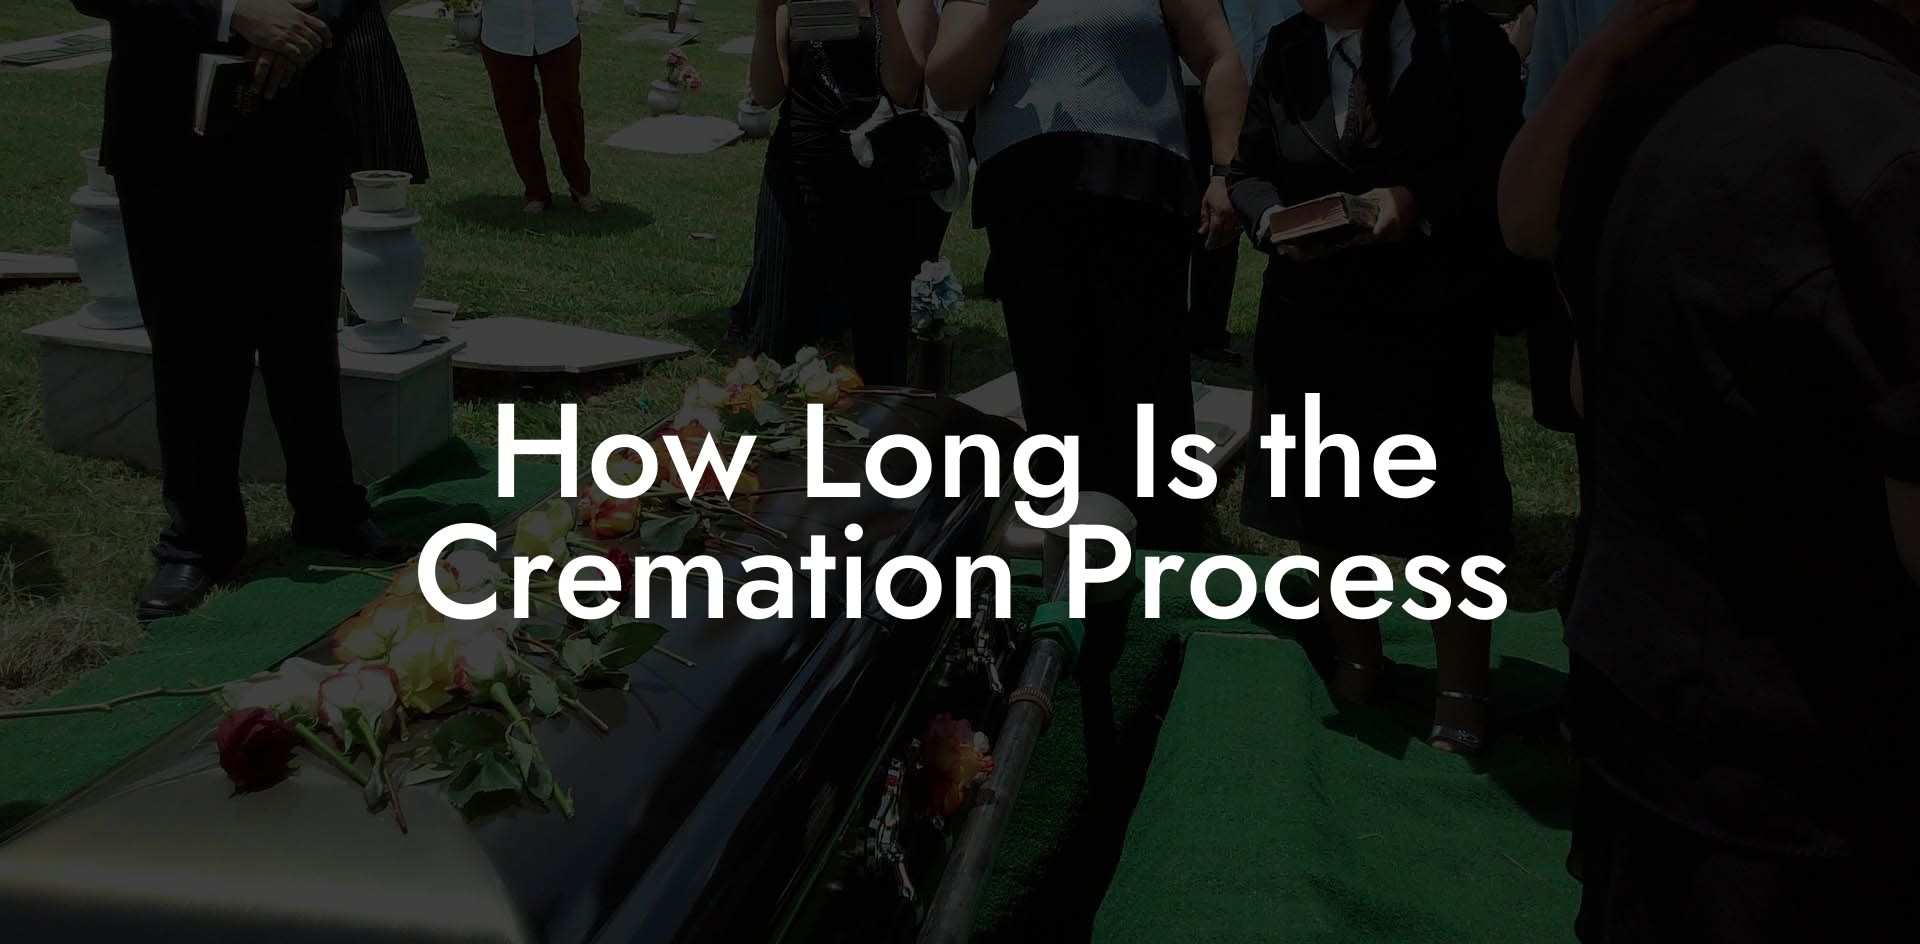 How Long Is the Cremation Process